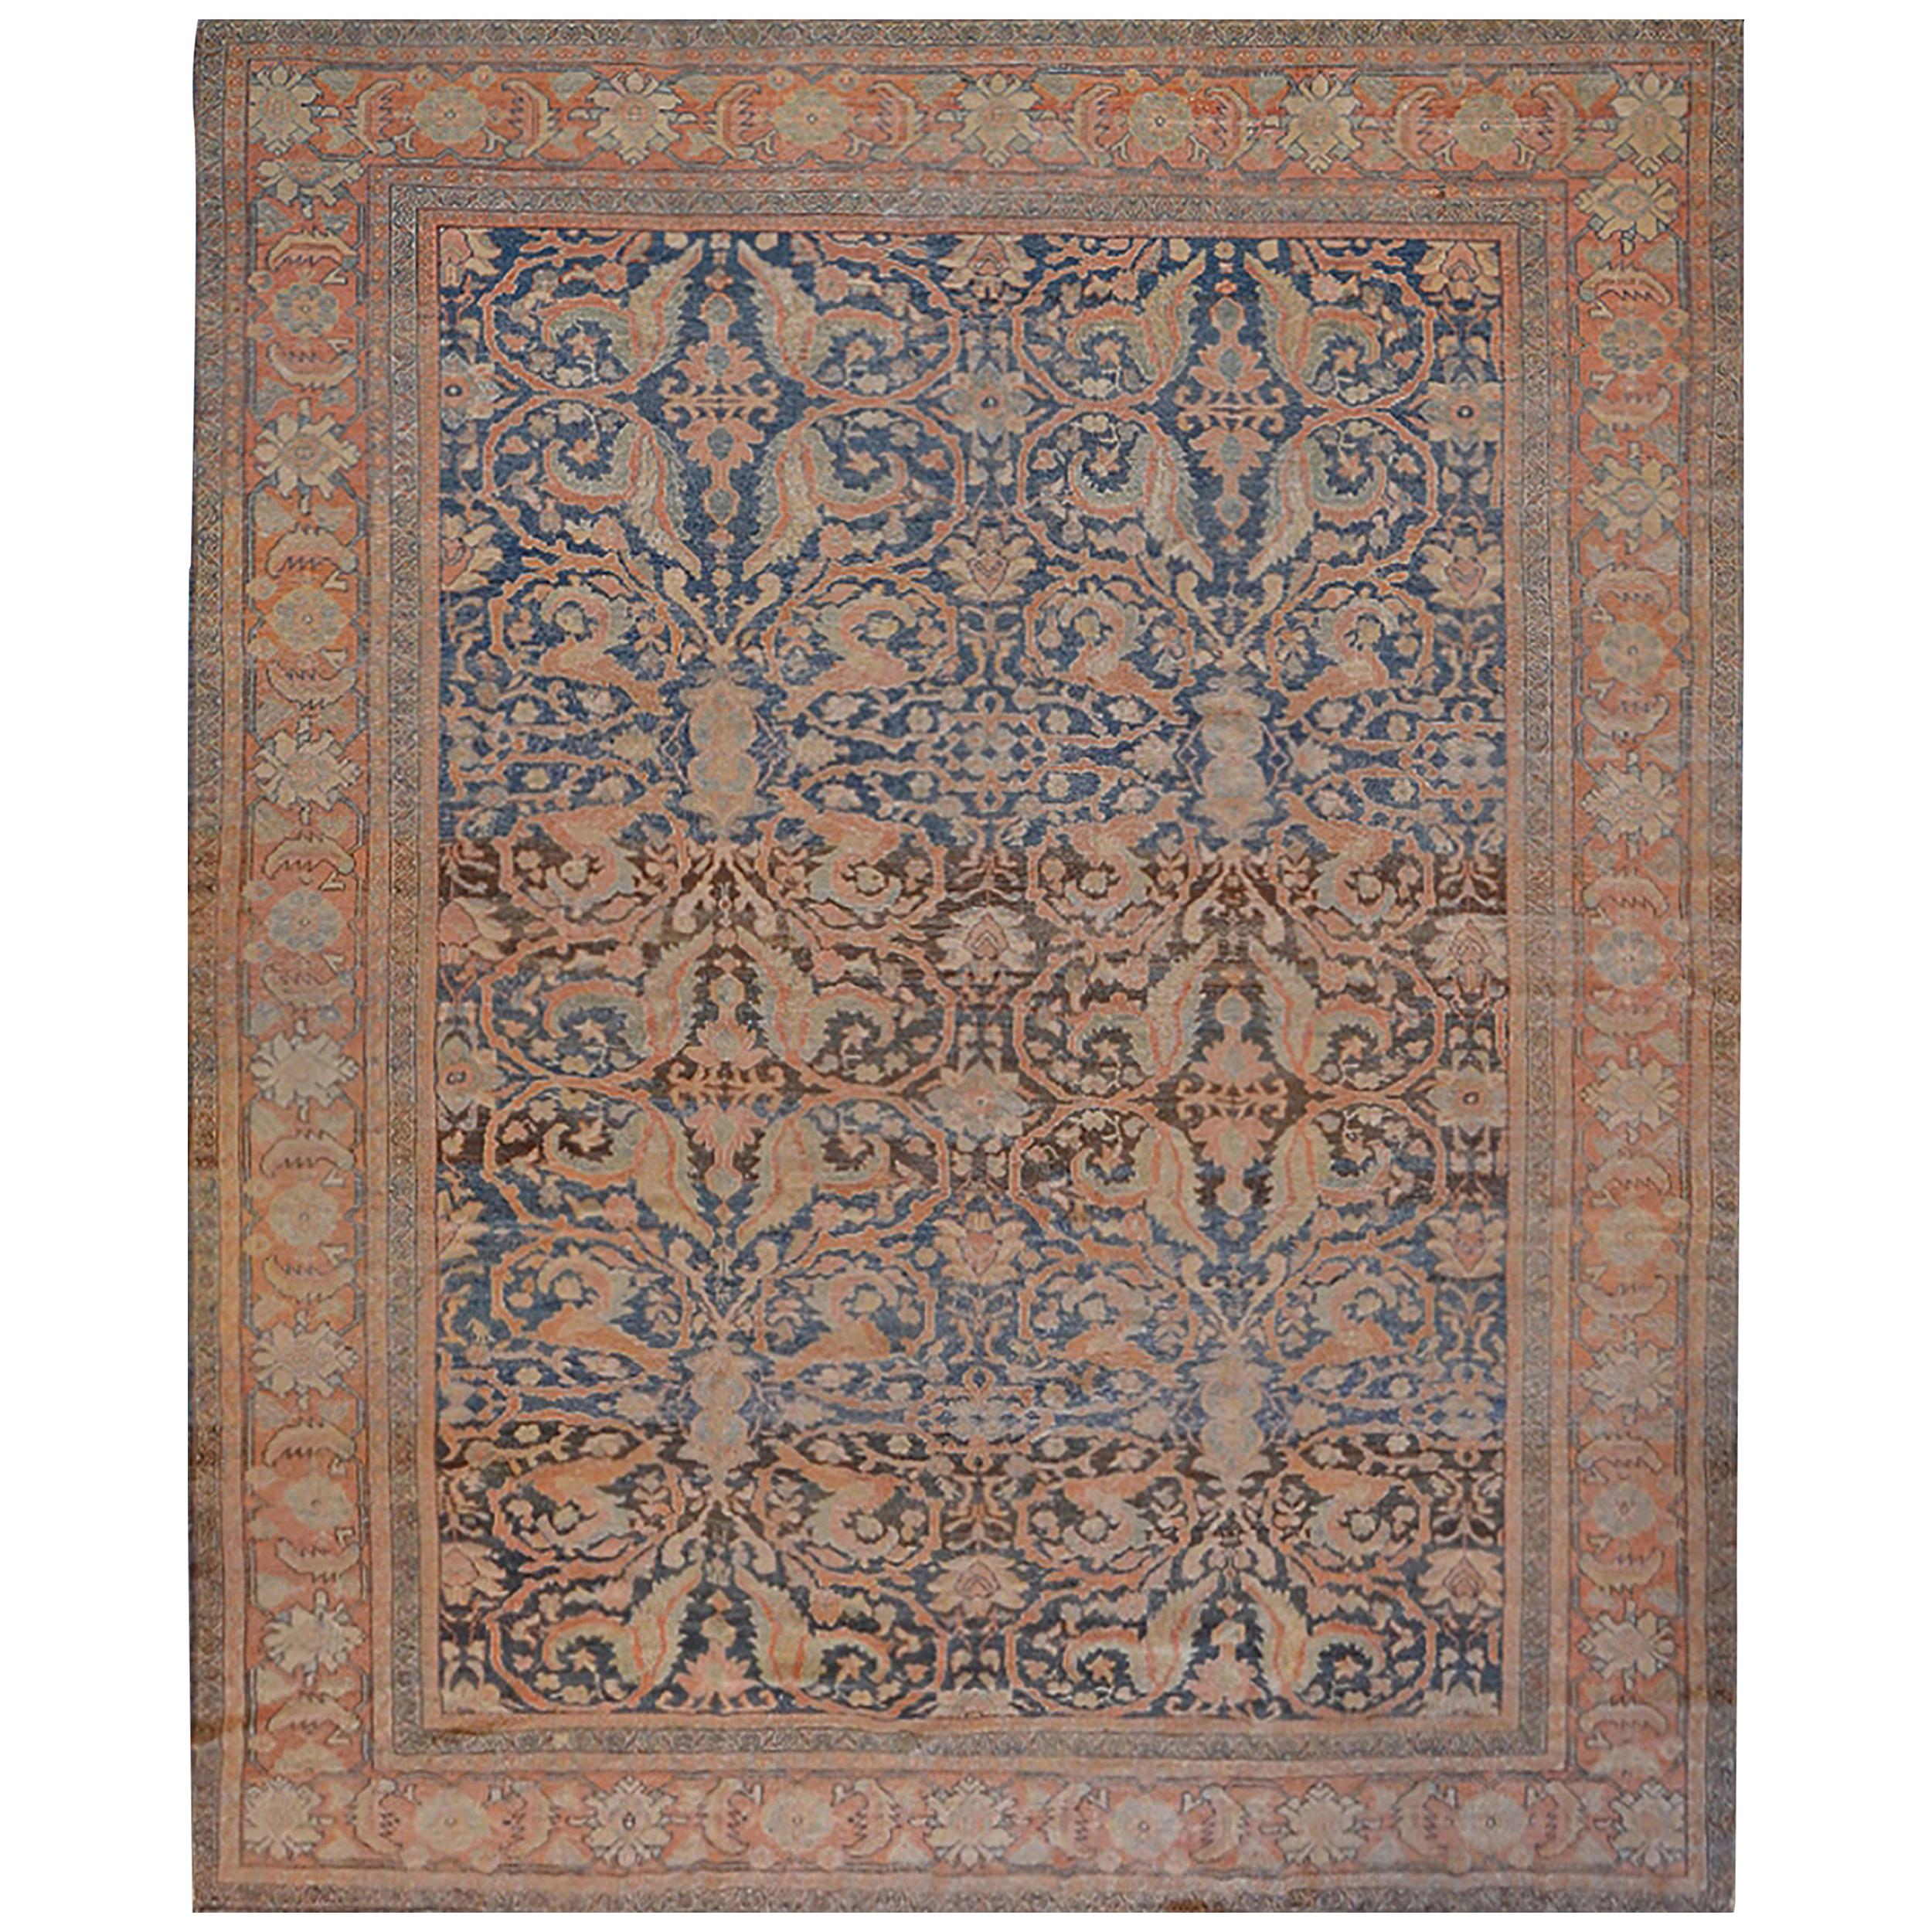 Handwoven Late 19th Century Persian Sultanabad